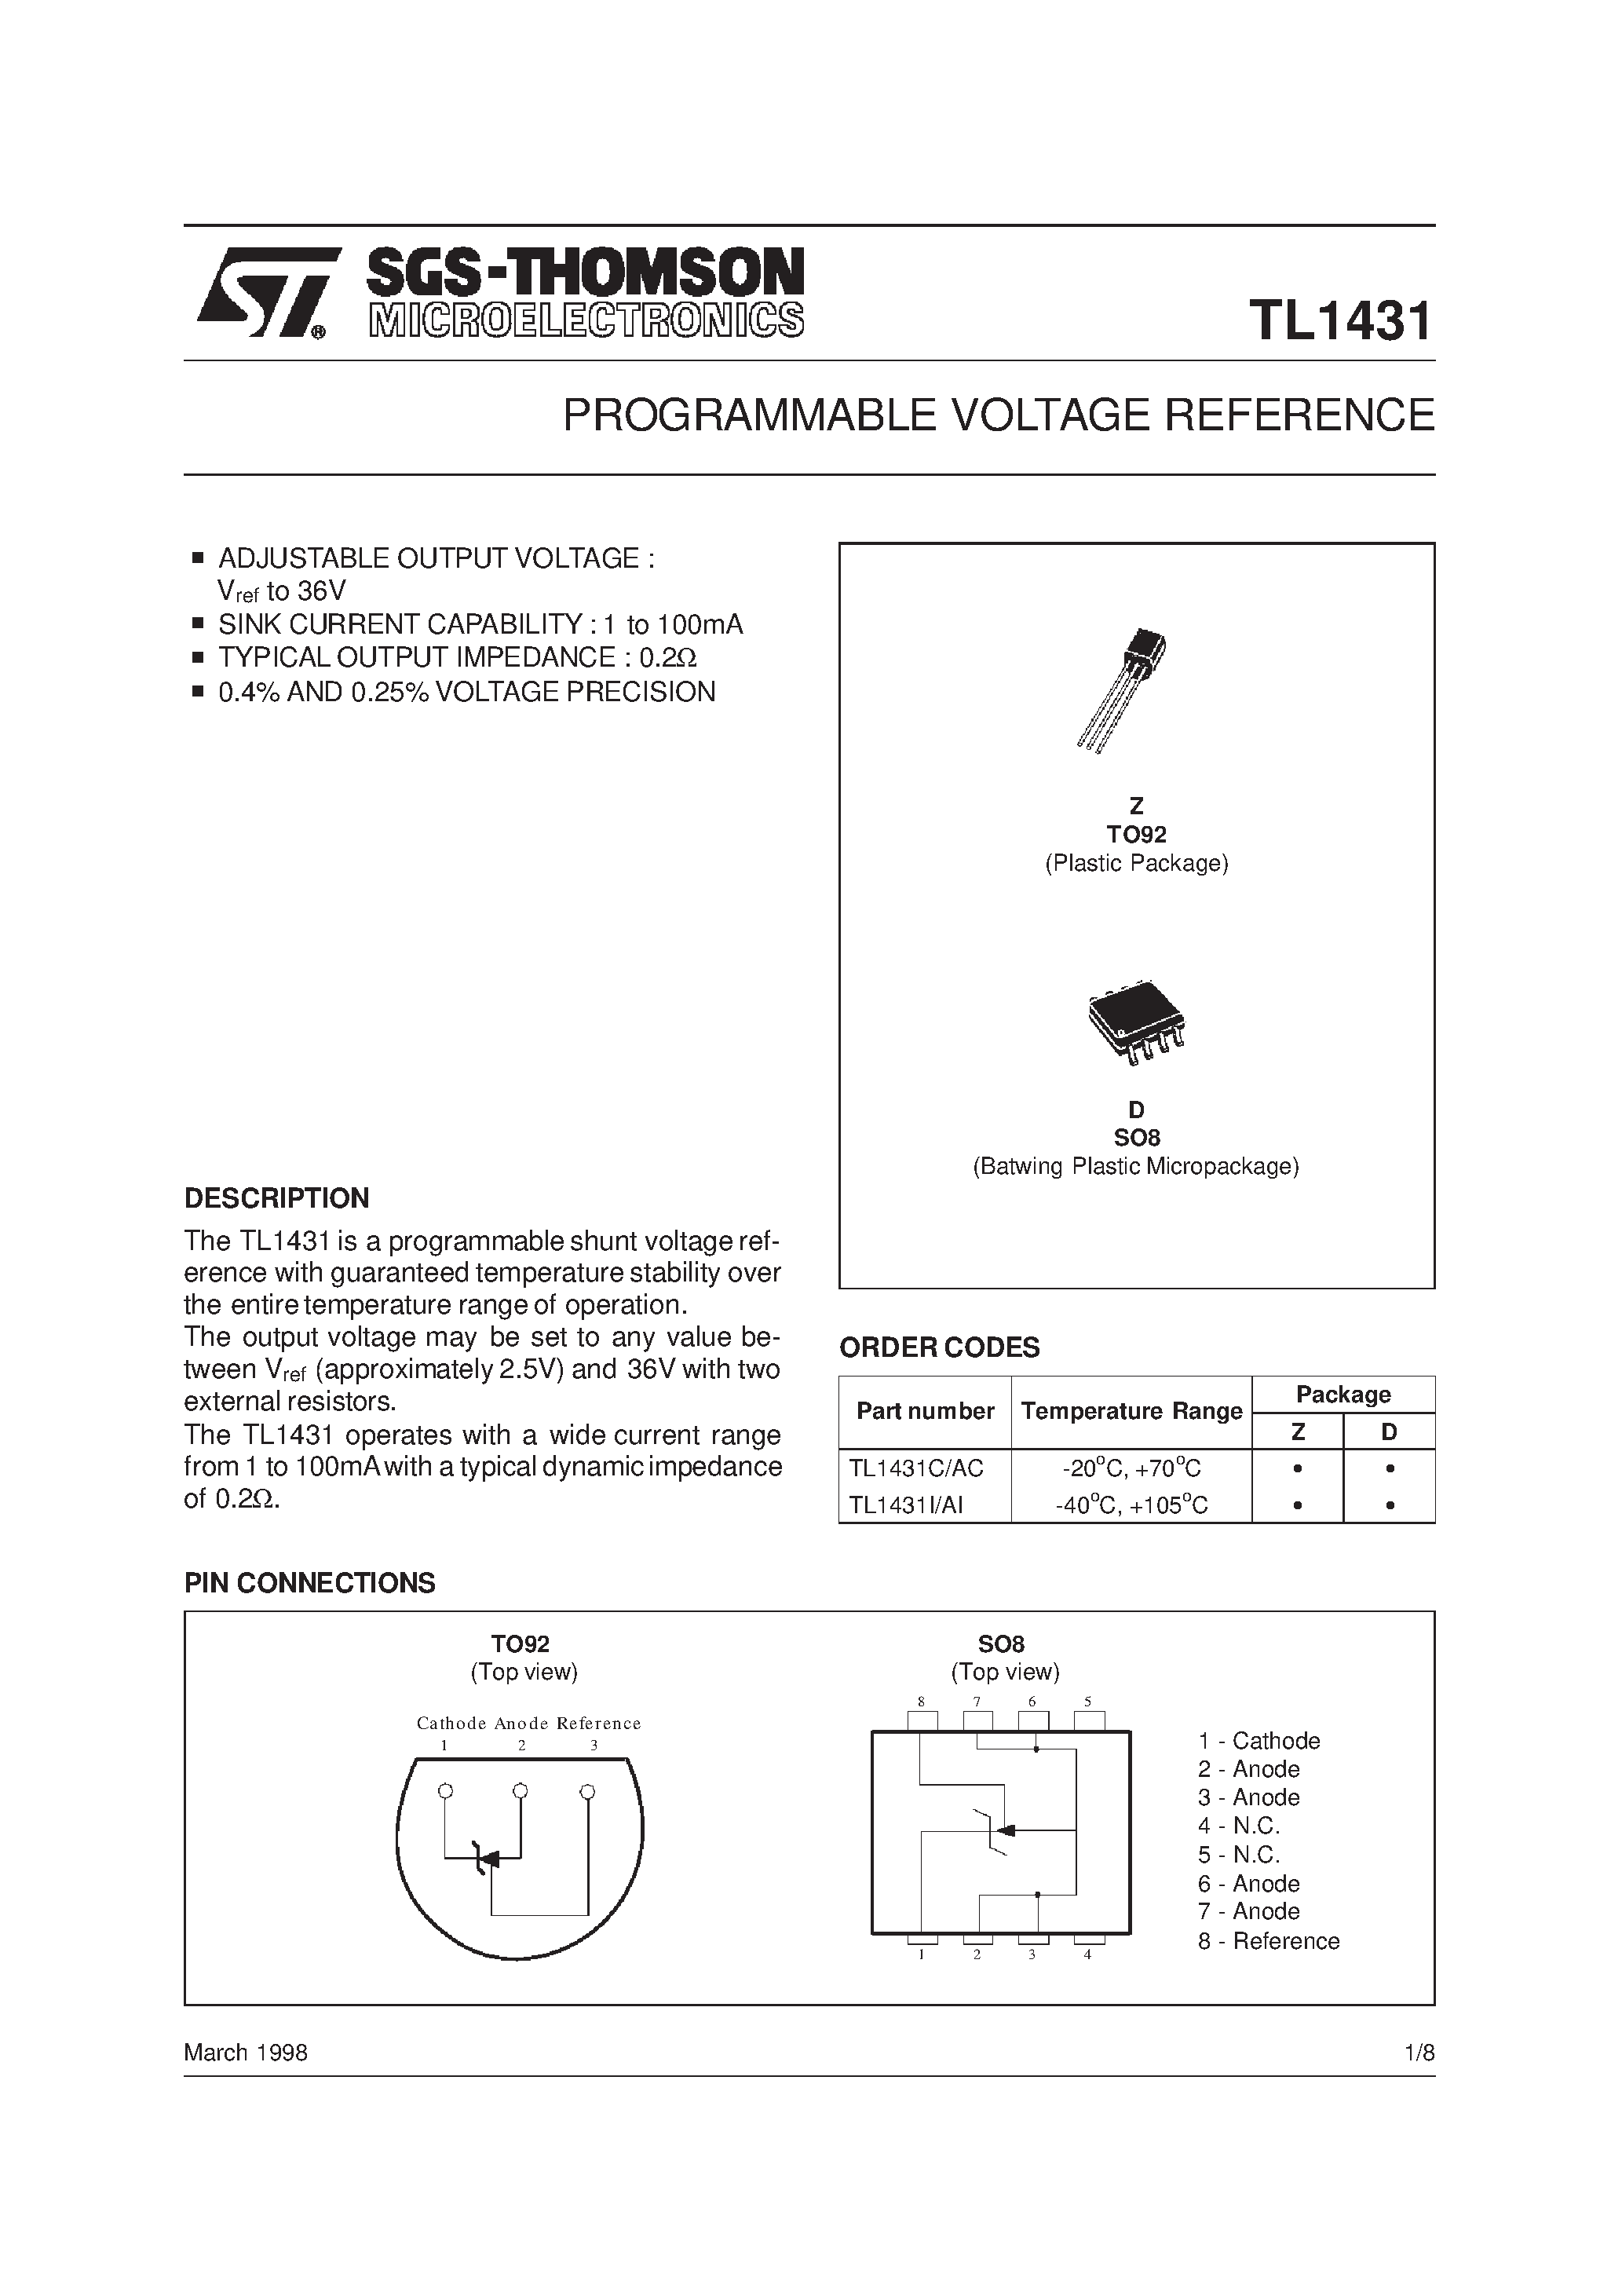 Даташит TL1431 - PROGRAMMABLE VOLTAGE REFERENCE страница 1